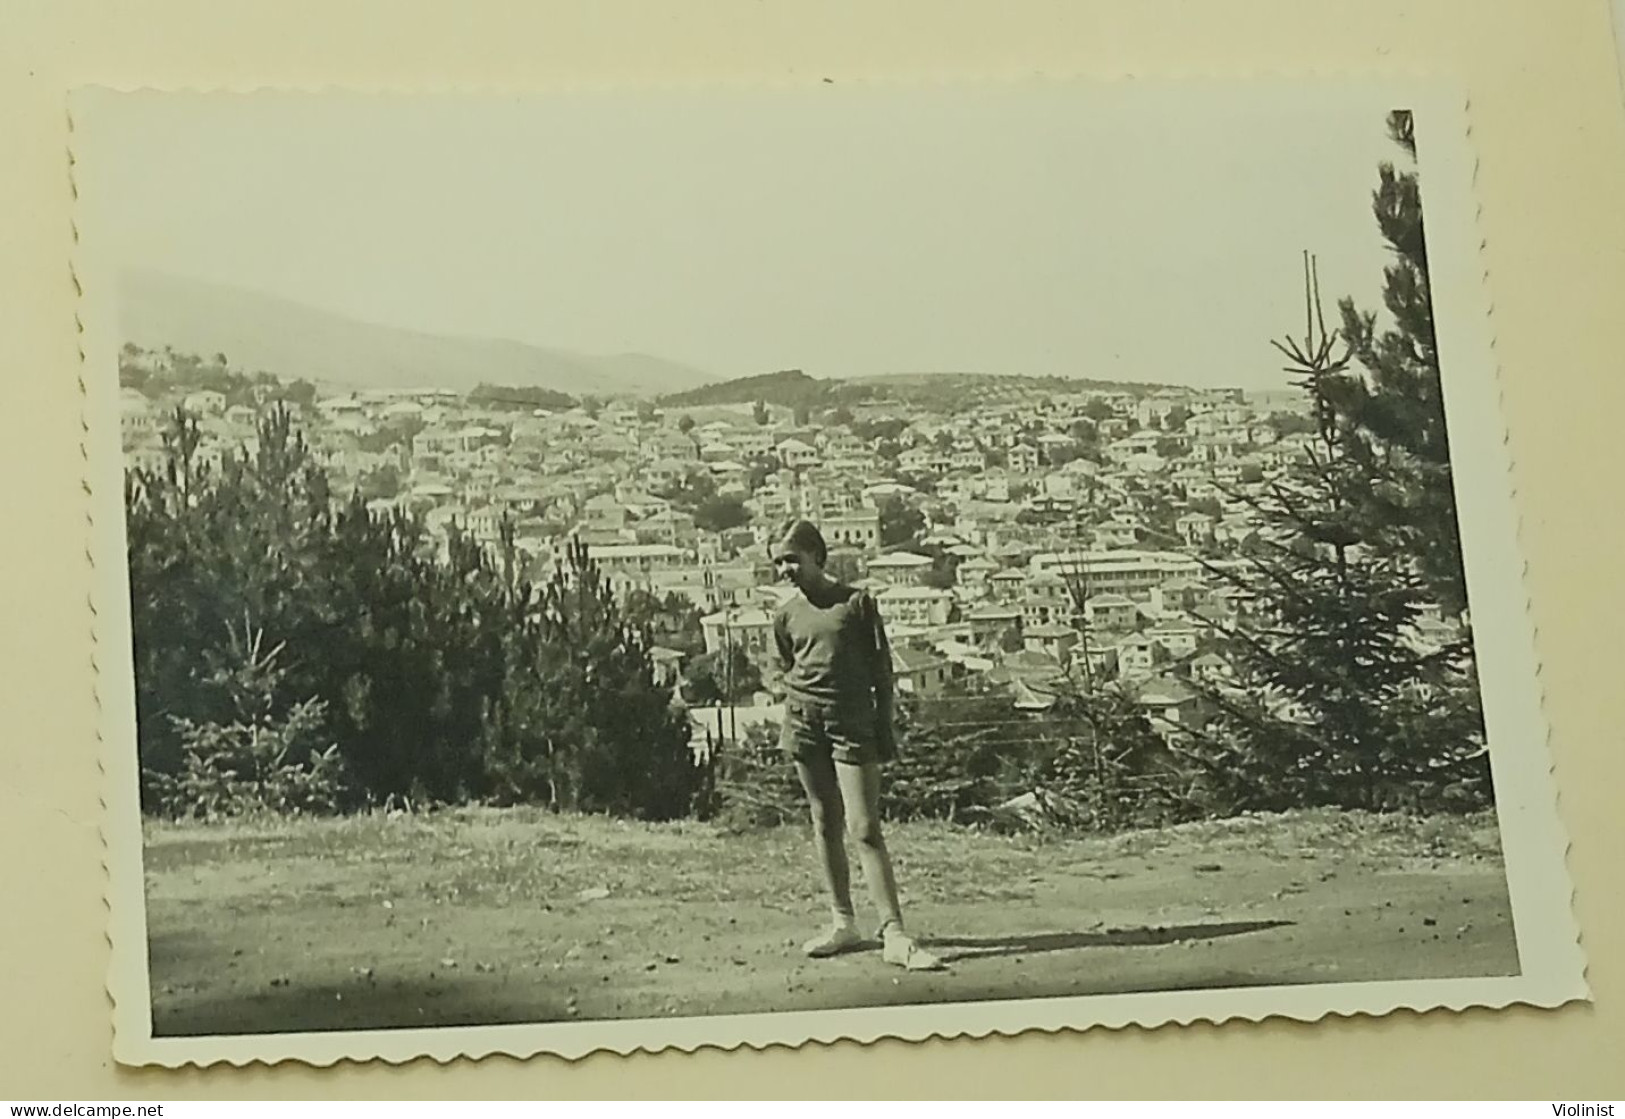 A Young Girl Stands On A Hill, The City Of Kruševo Can Be Seen Behind, North Macedonia In 1969. - Lieux